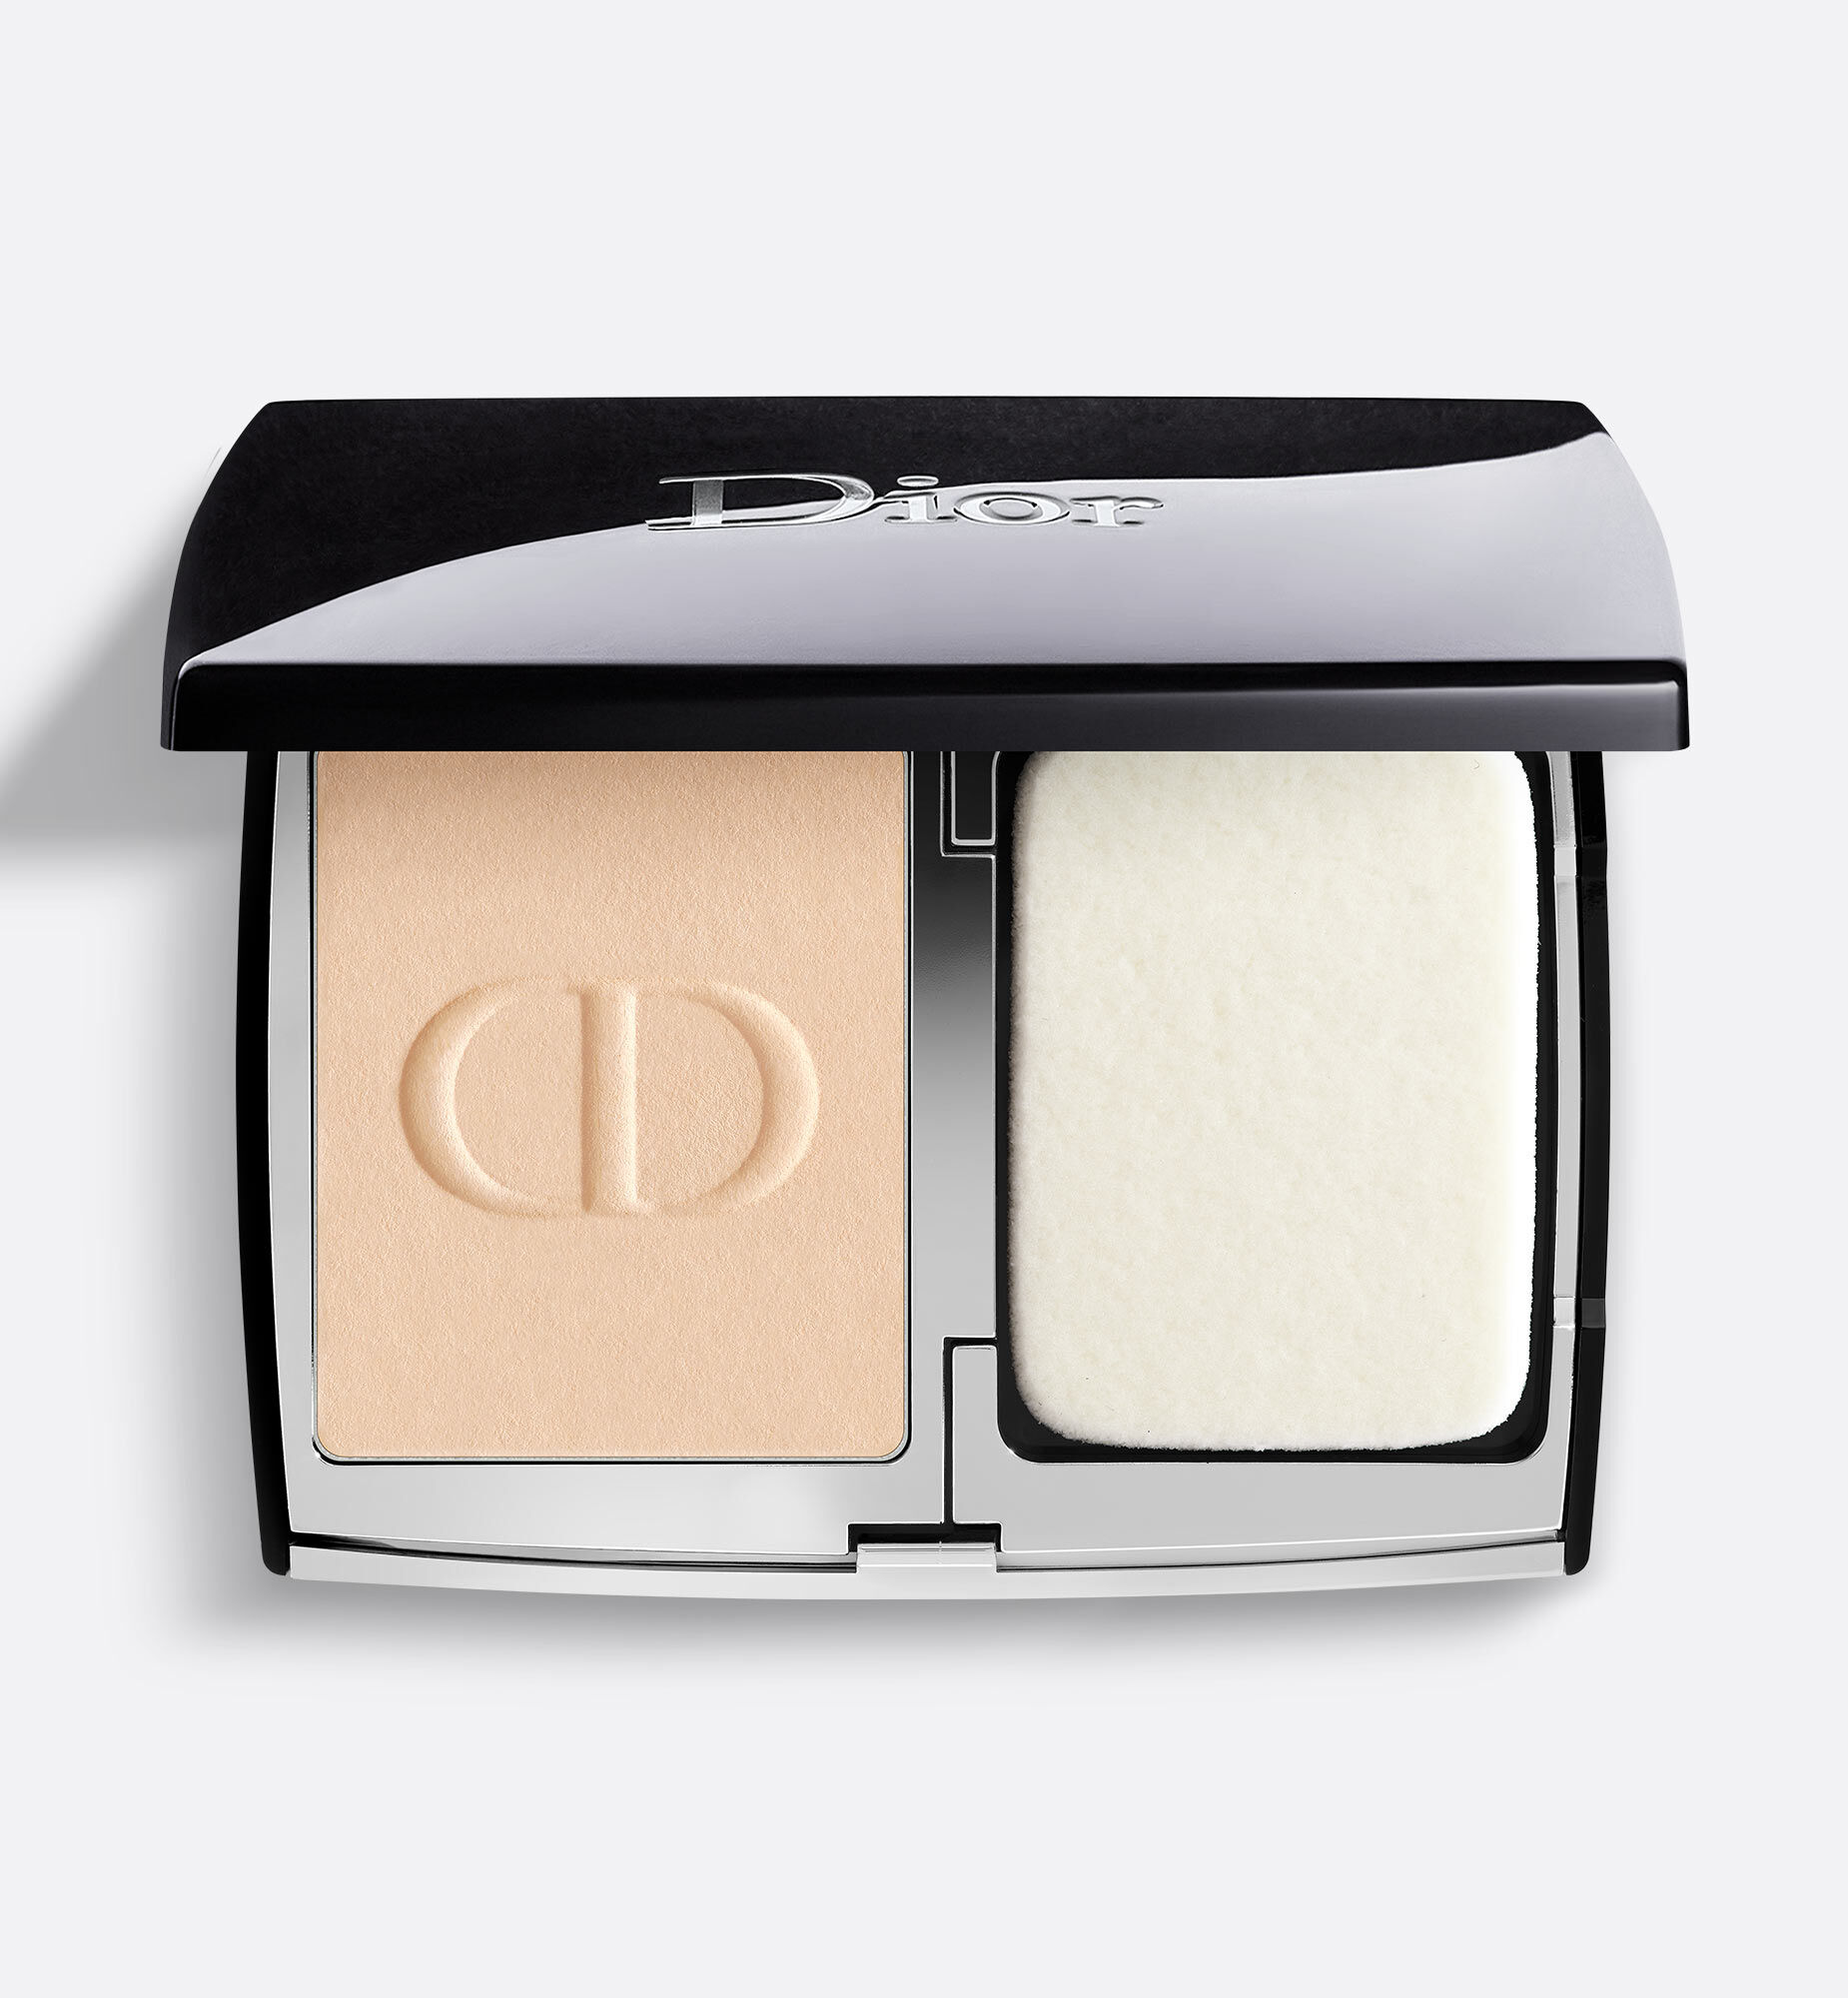 Christian Dior  Diorskin Forever Extreme Control Perfect Matte Powder  Makeup SPF 20 9g031oz  Nền  Phấn  Free Worldwide Shipping   Strawberrynet VN